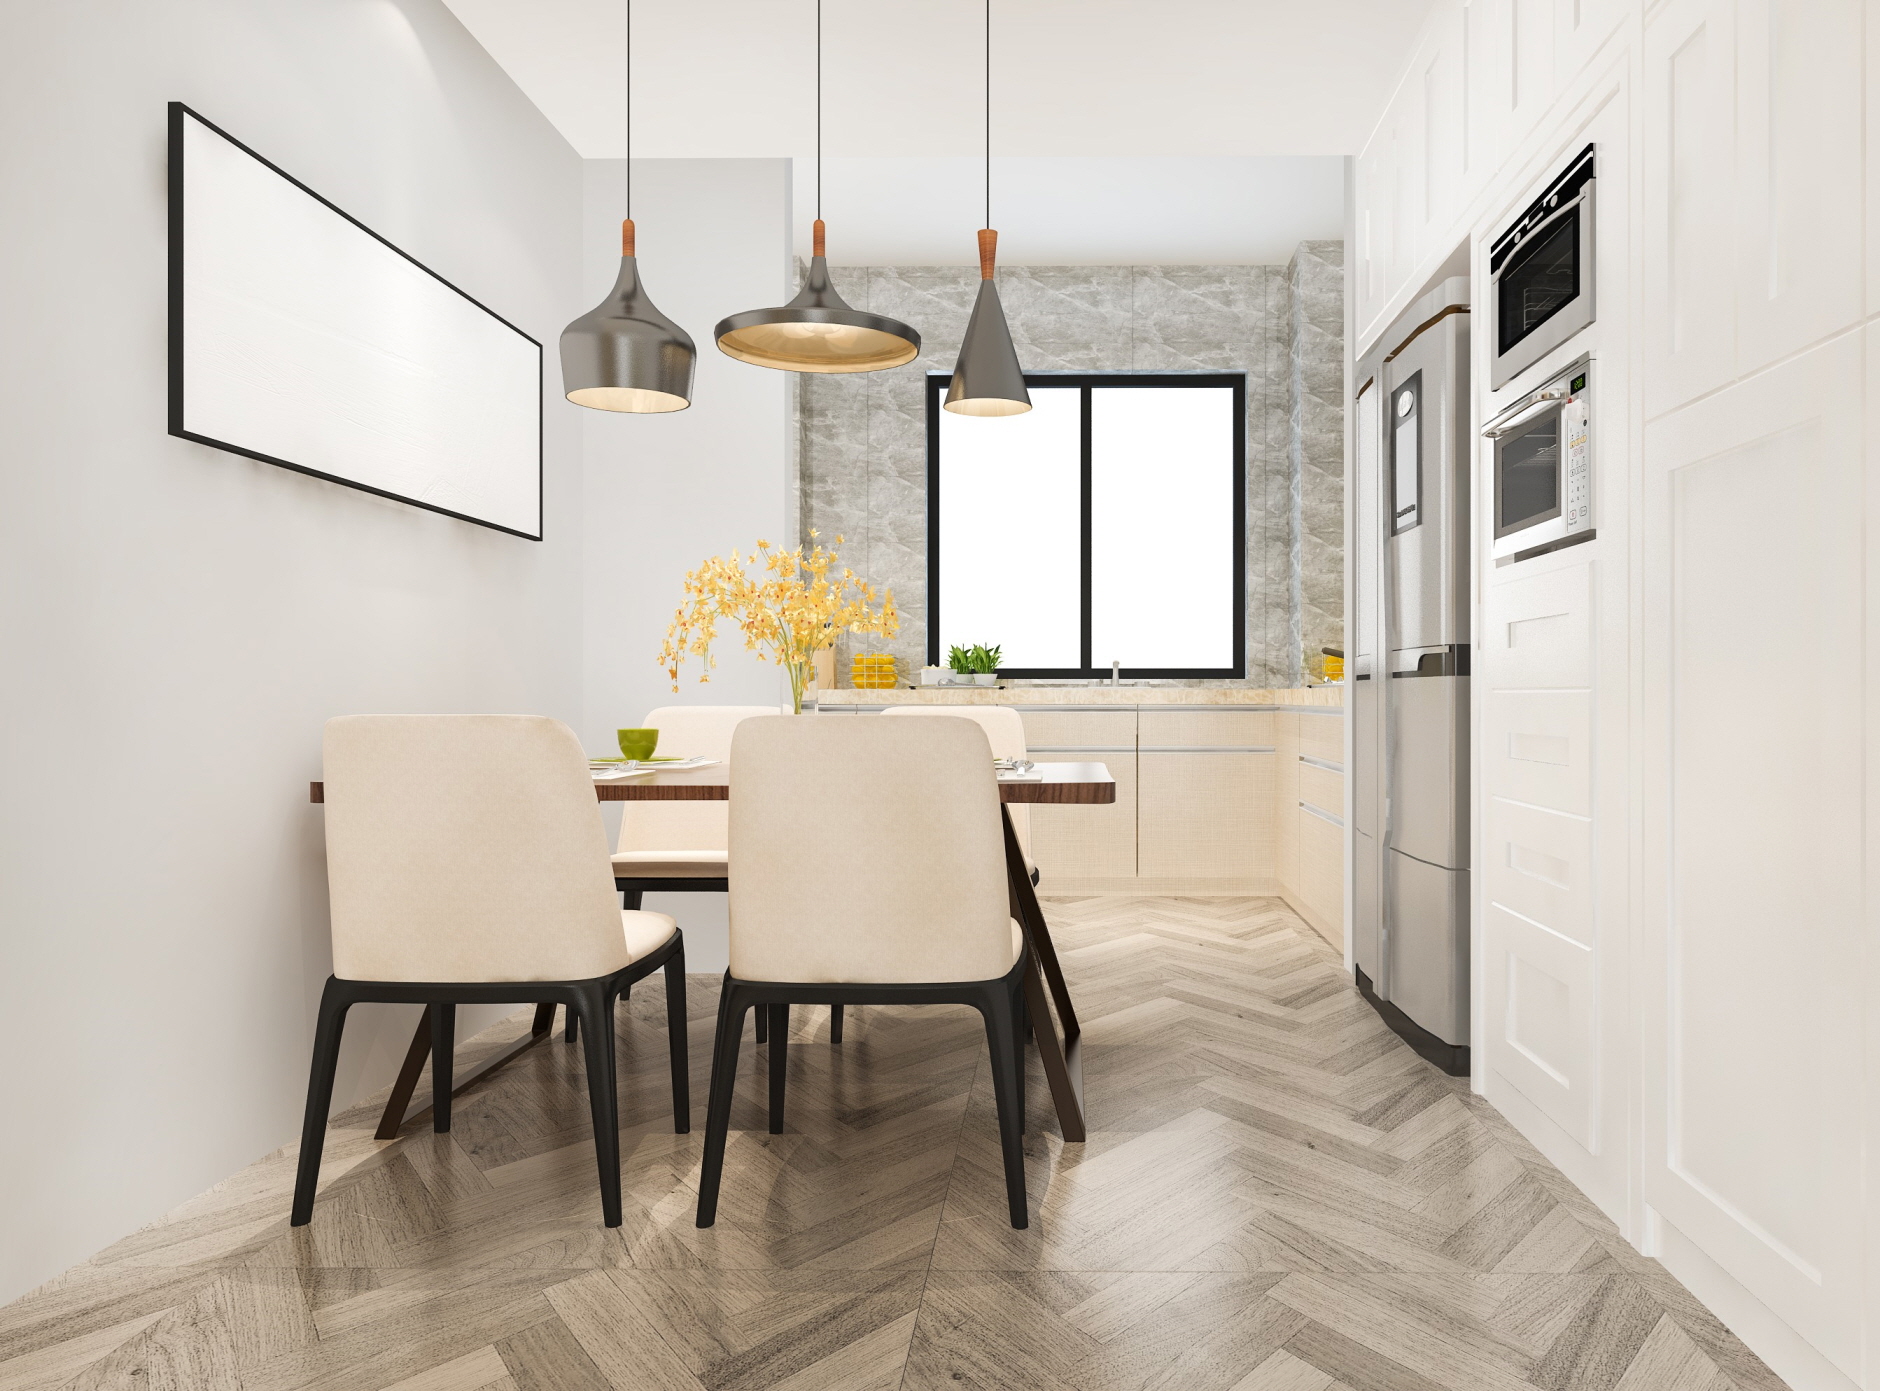 Enhance your kitchen with colorful, geometric tiles for flooring and backsplashes.